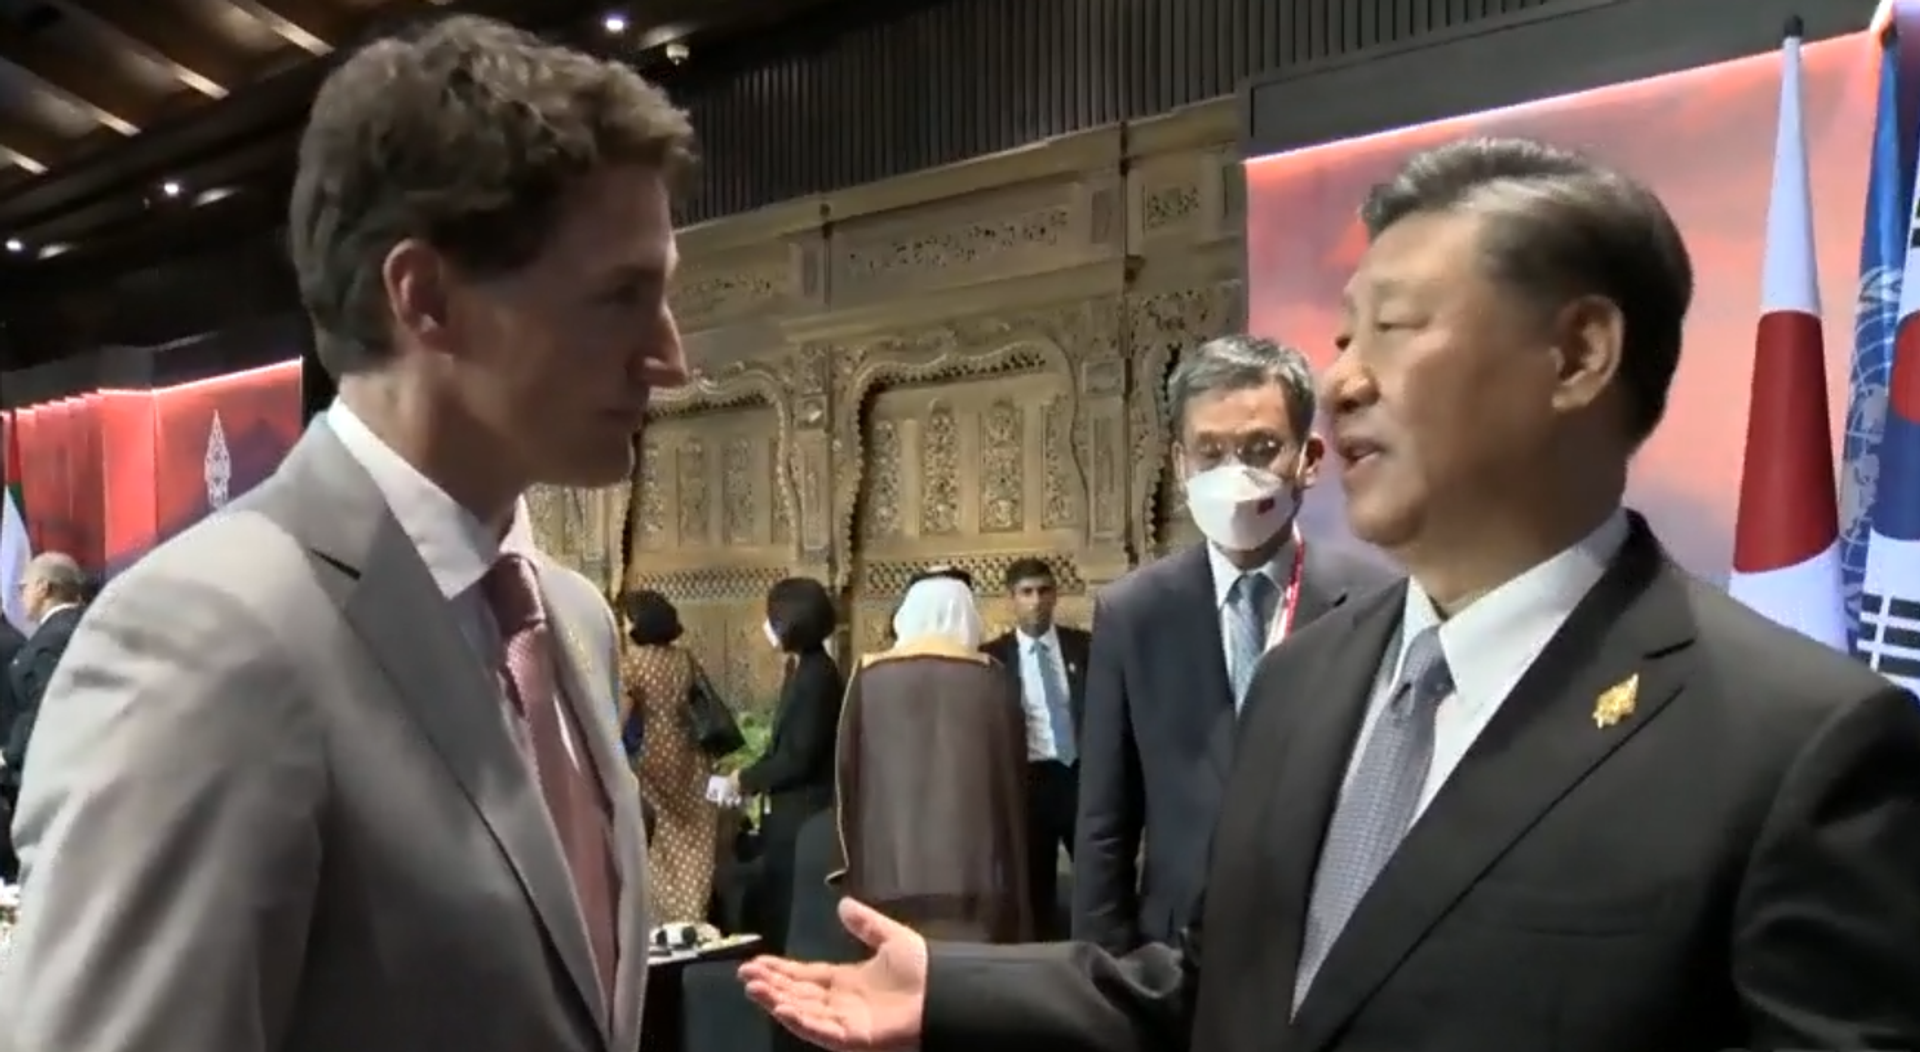 Canadian Prime Minister Justin Trudeau (left) and Chinese President Xi Jinping exchange pleasantries at the G20 Summit in Indonesia. November 16, 2022. Screengrab. - Sputnik International, 1920, 29.11.2022